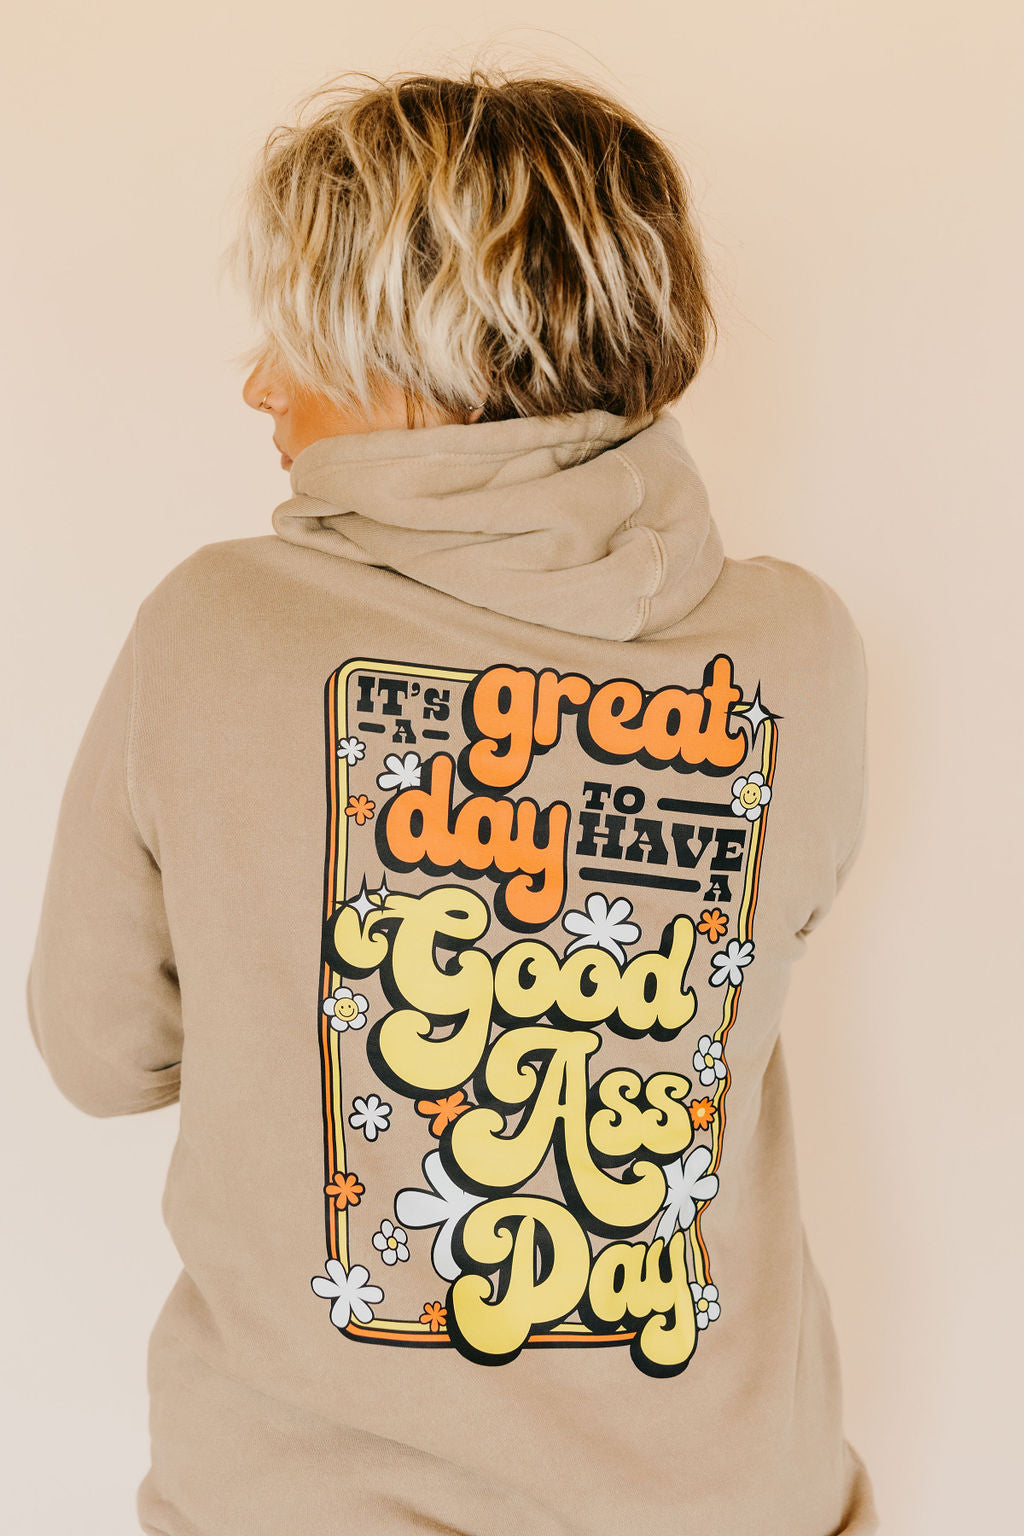 Good Ass Hair Day "It's a great day to have a good ass day" Sweatshirts